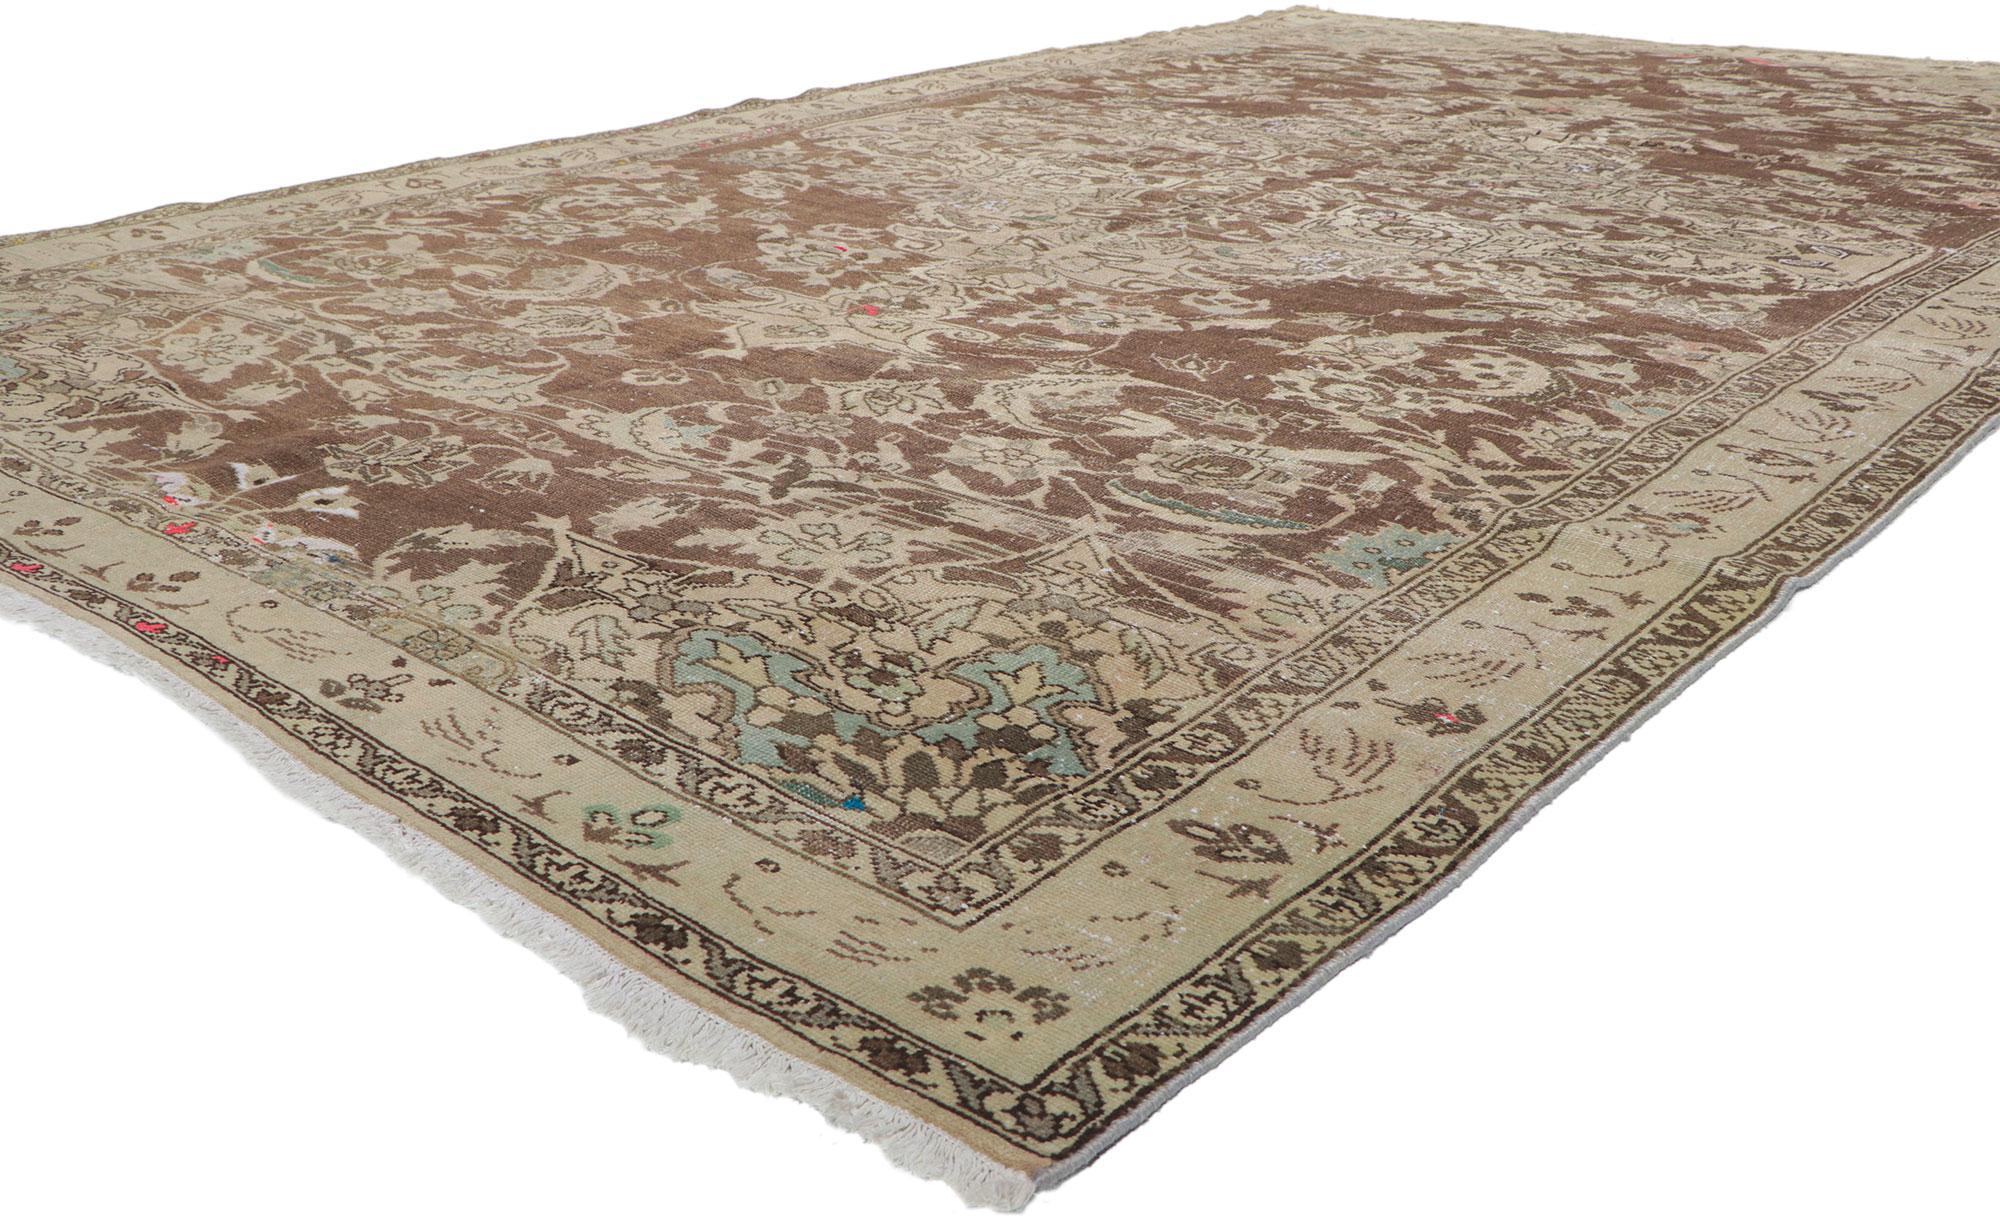 60961 Distressed Antique Persian Feridan Rug, 07'05 x 12'03.
Effortless beauty and romantic connotations meet soft, bespoke vibes with a rustic Belgian style in this hand knotted wool distressed antique Persian Feridan rug. The abrashed brown field